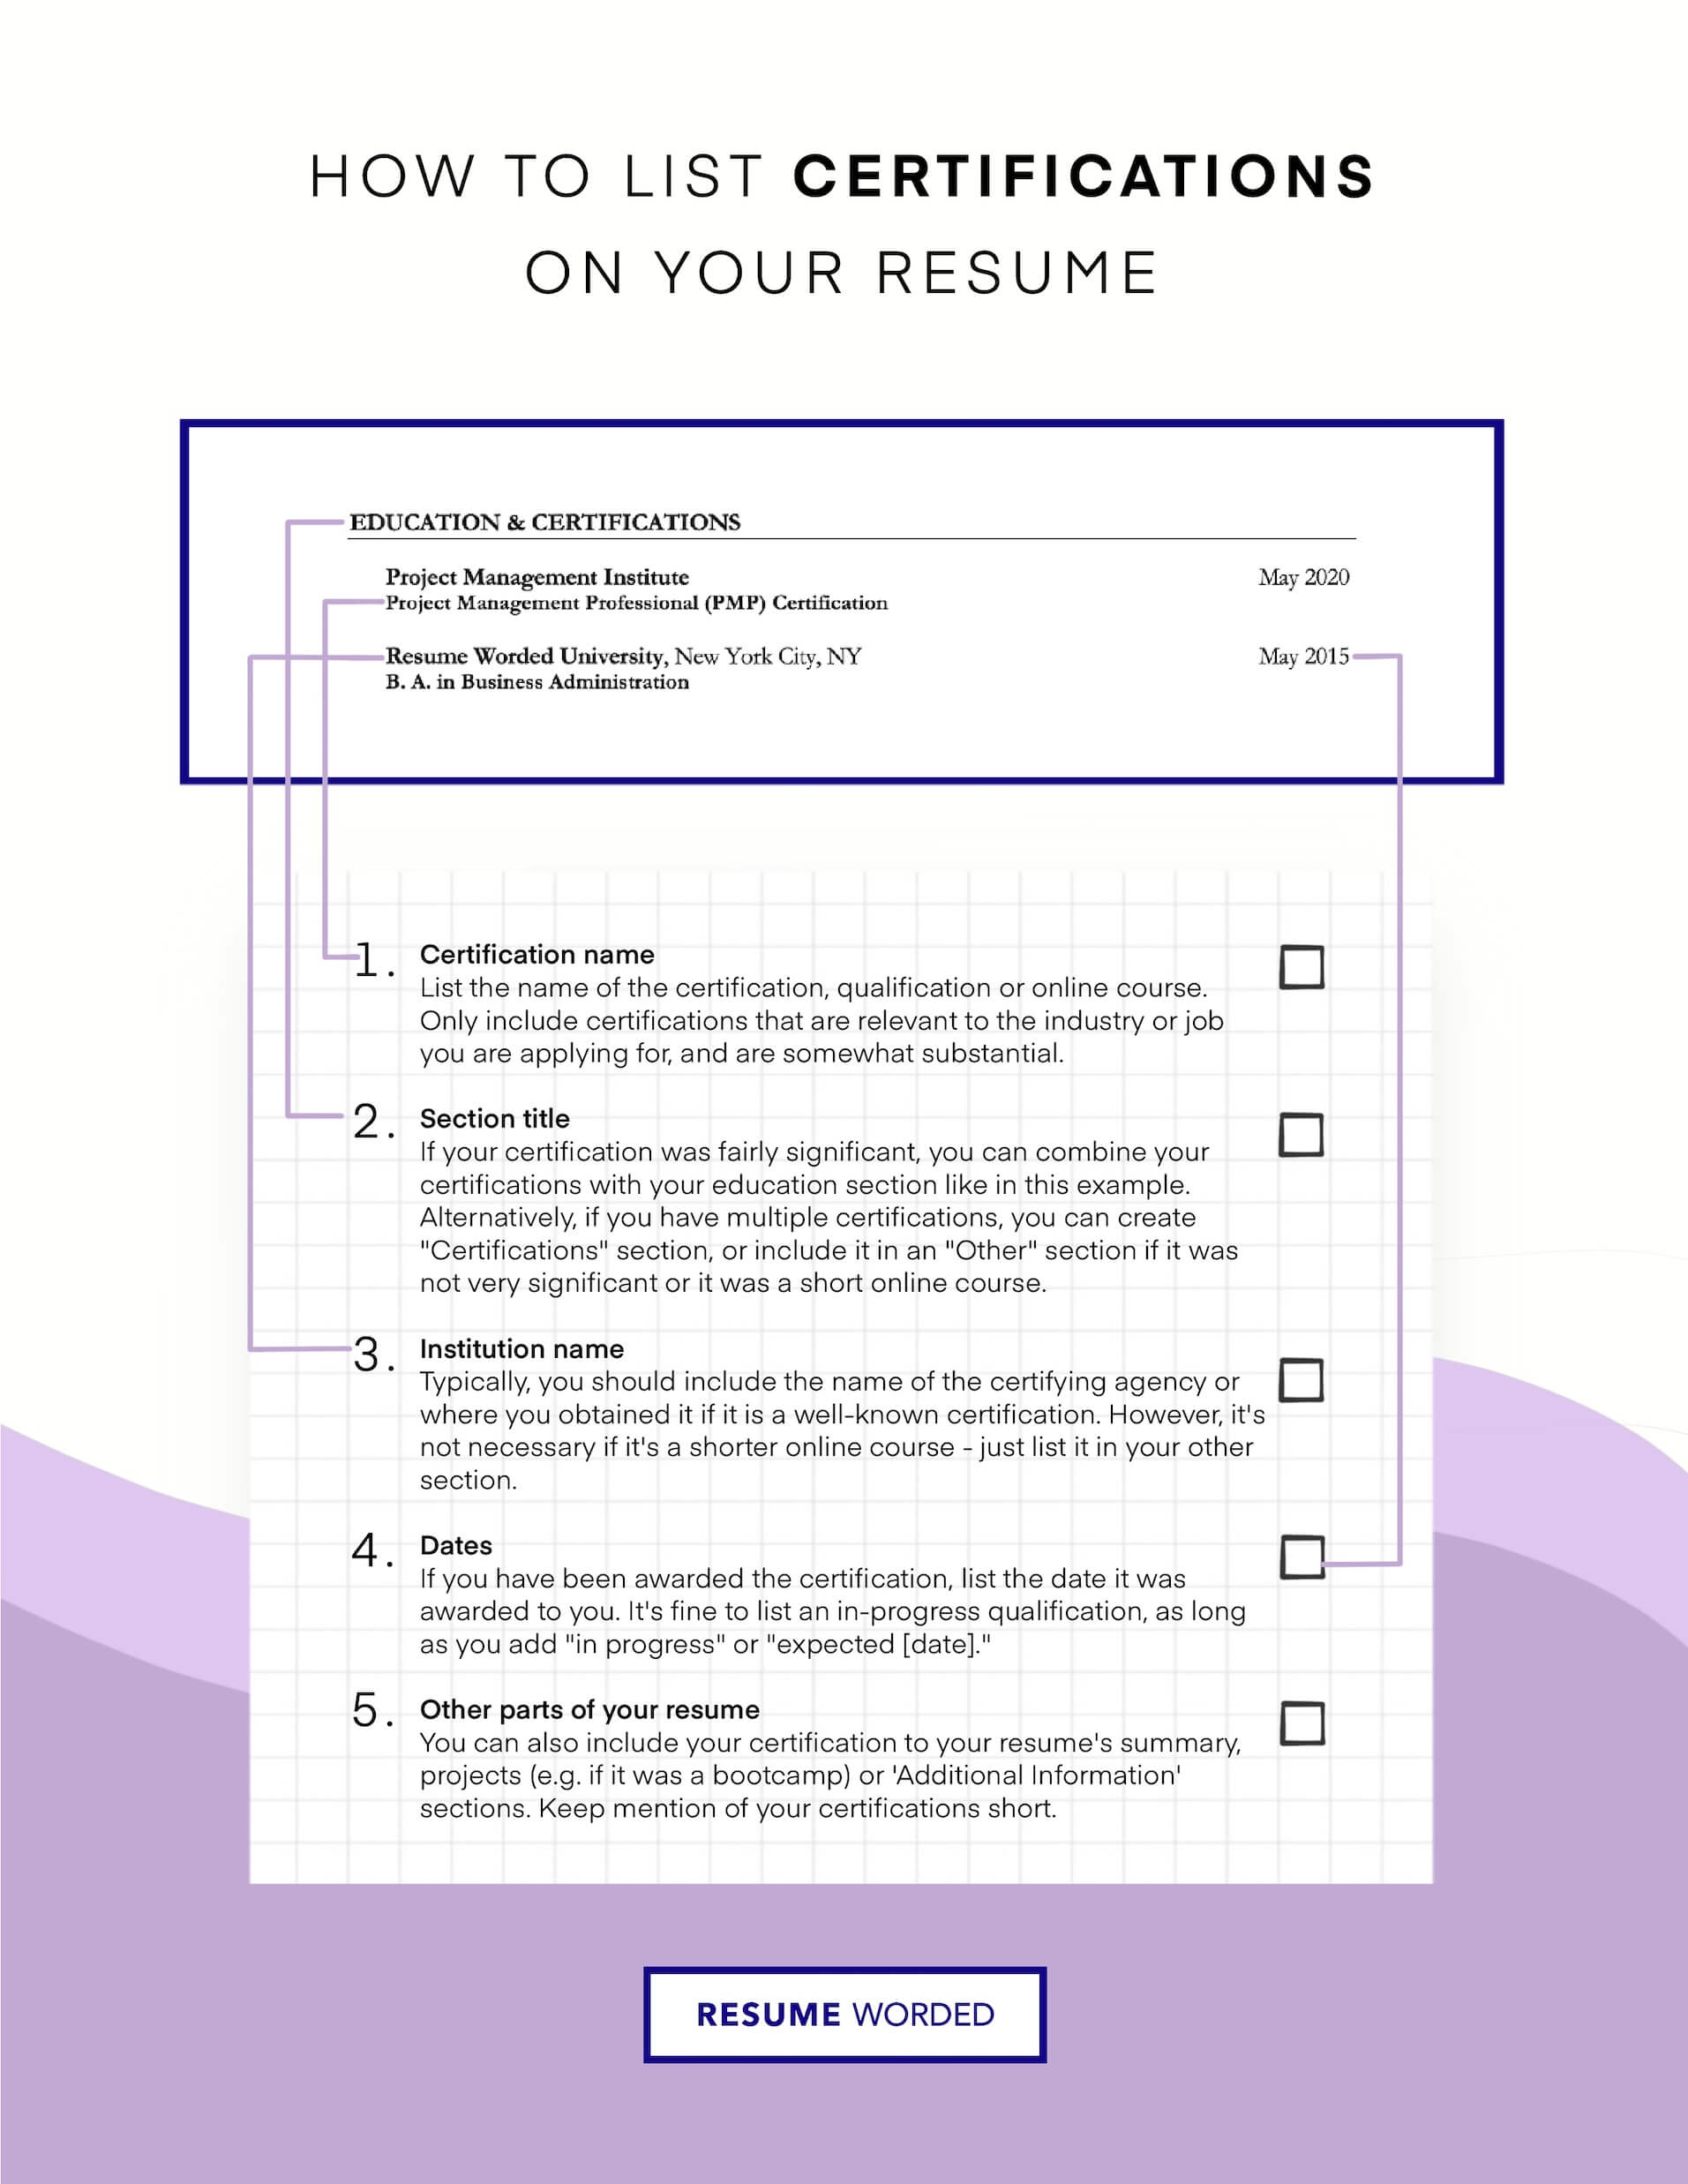 Highlight relevant certifications - Manufacturing Quality Engineer Resume